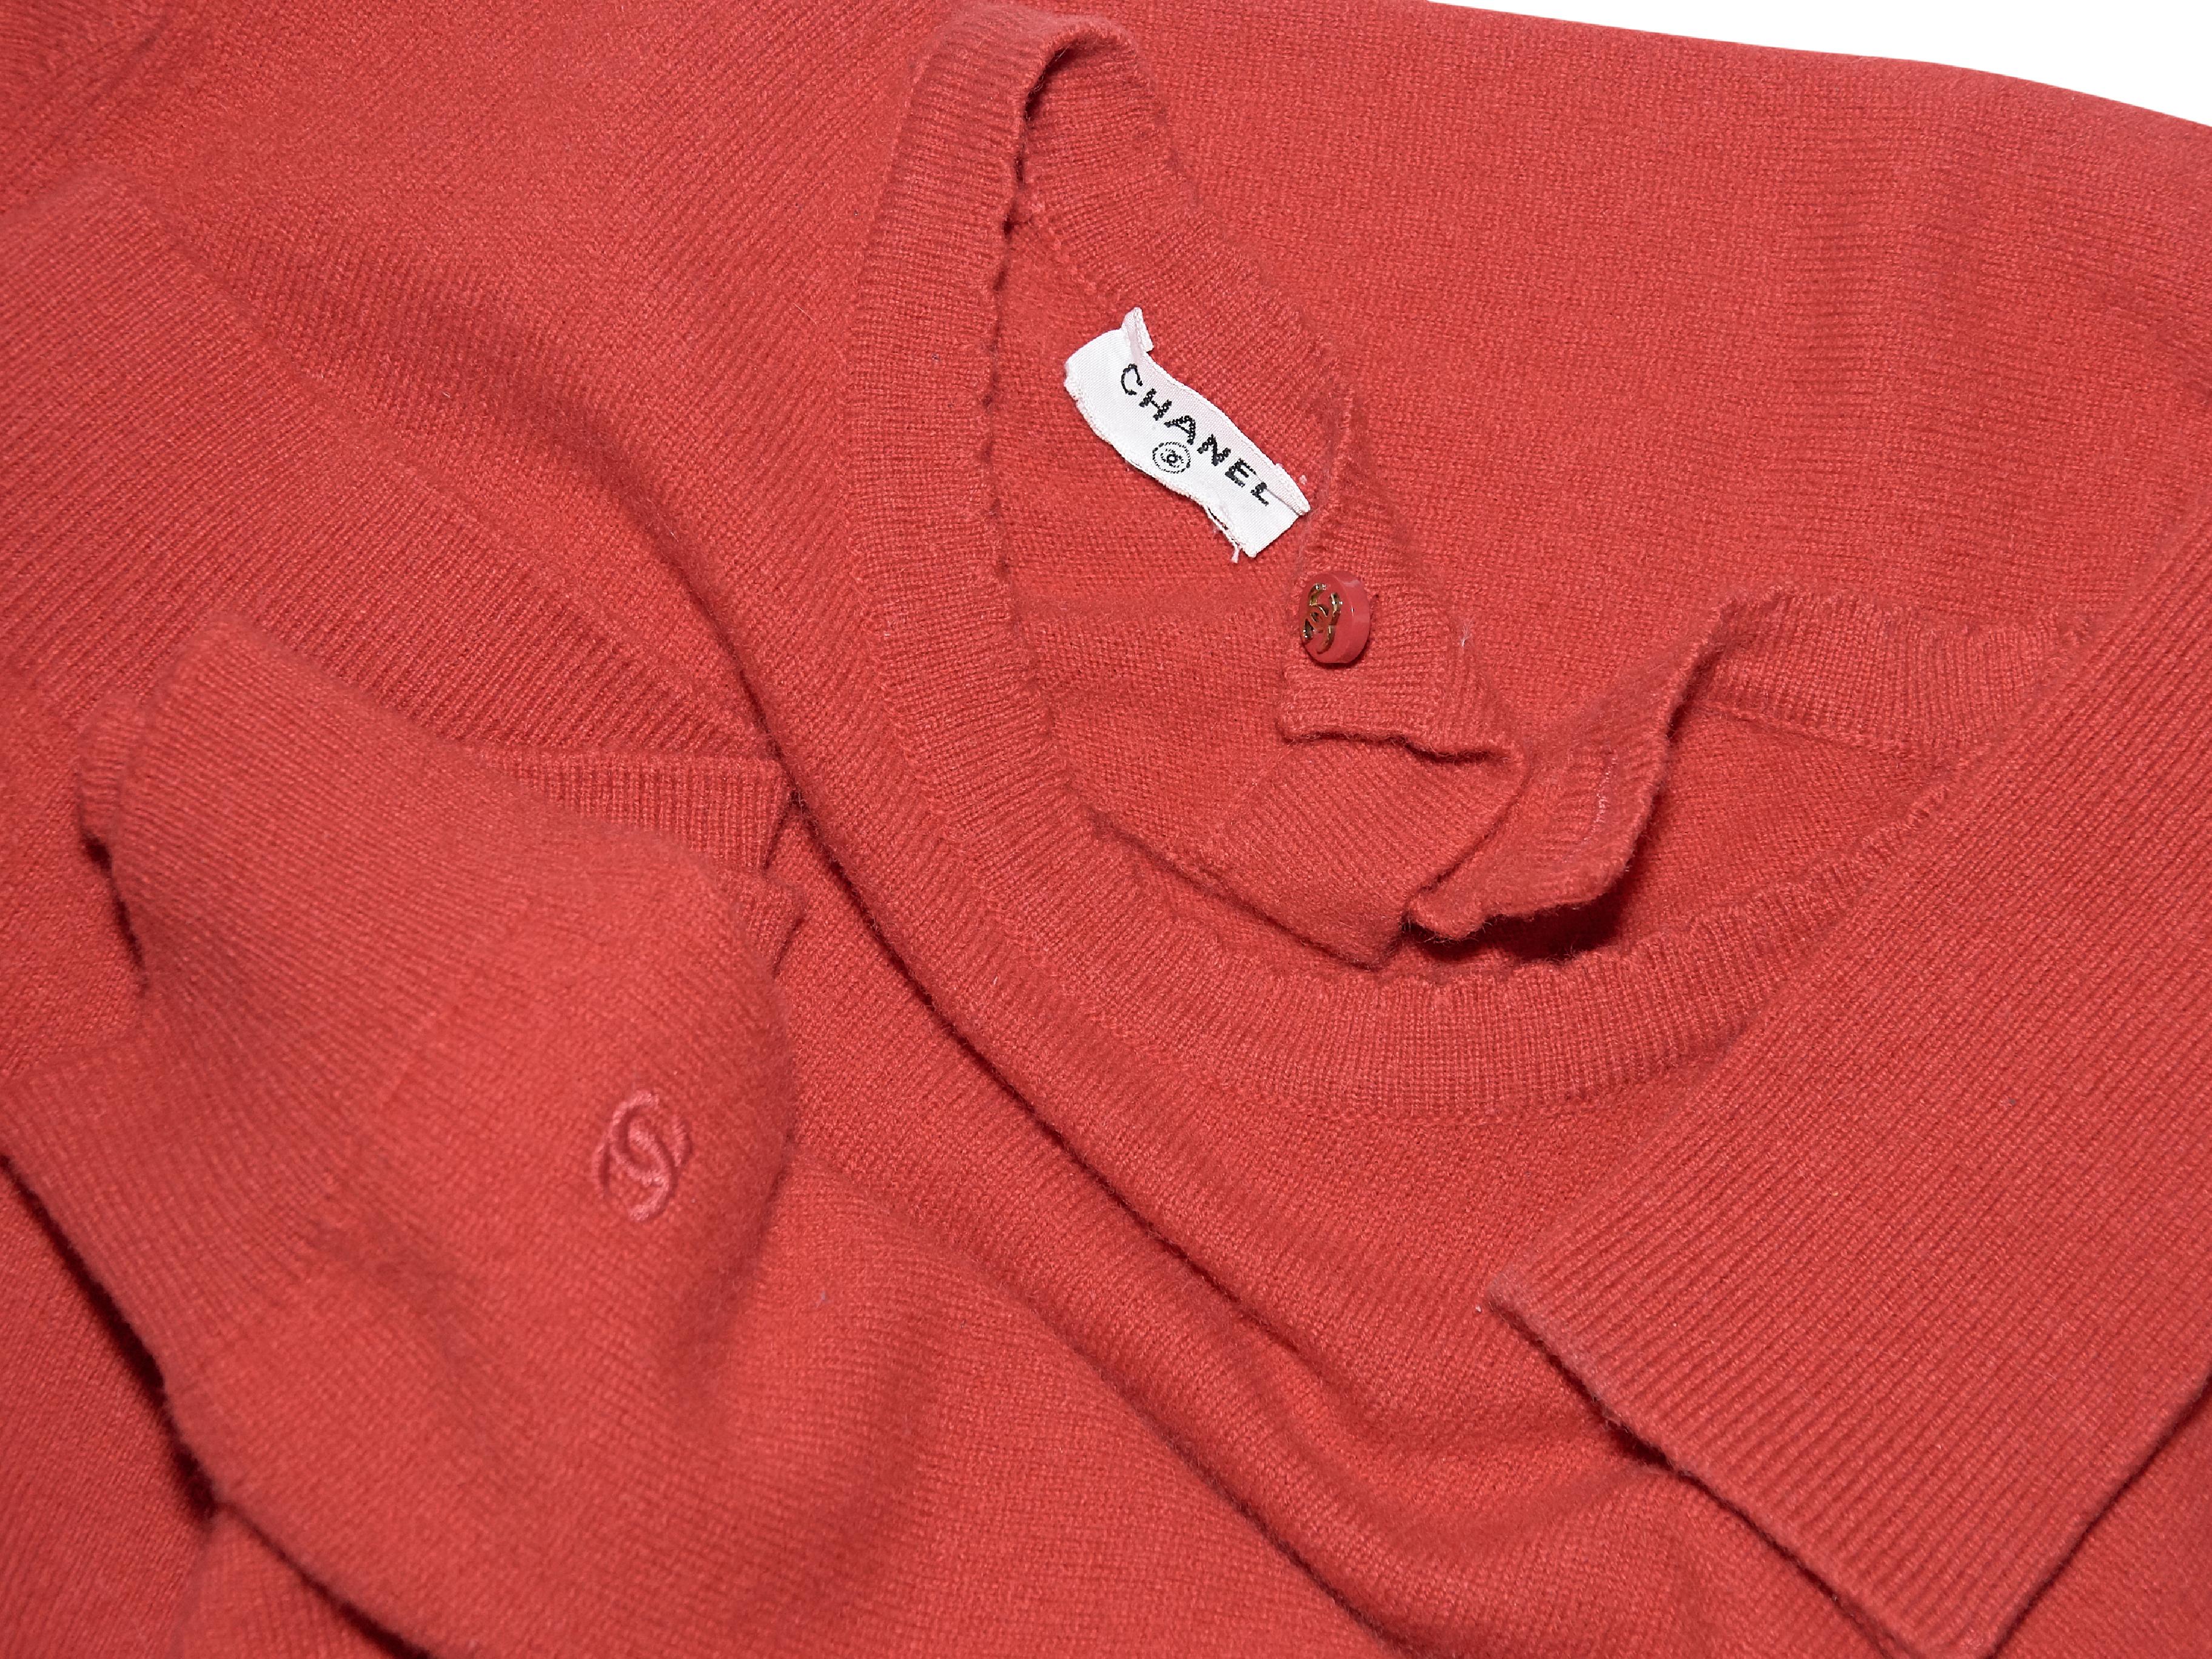 chanel red sweater